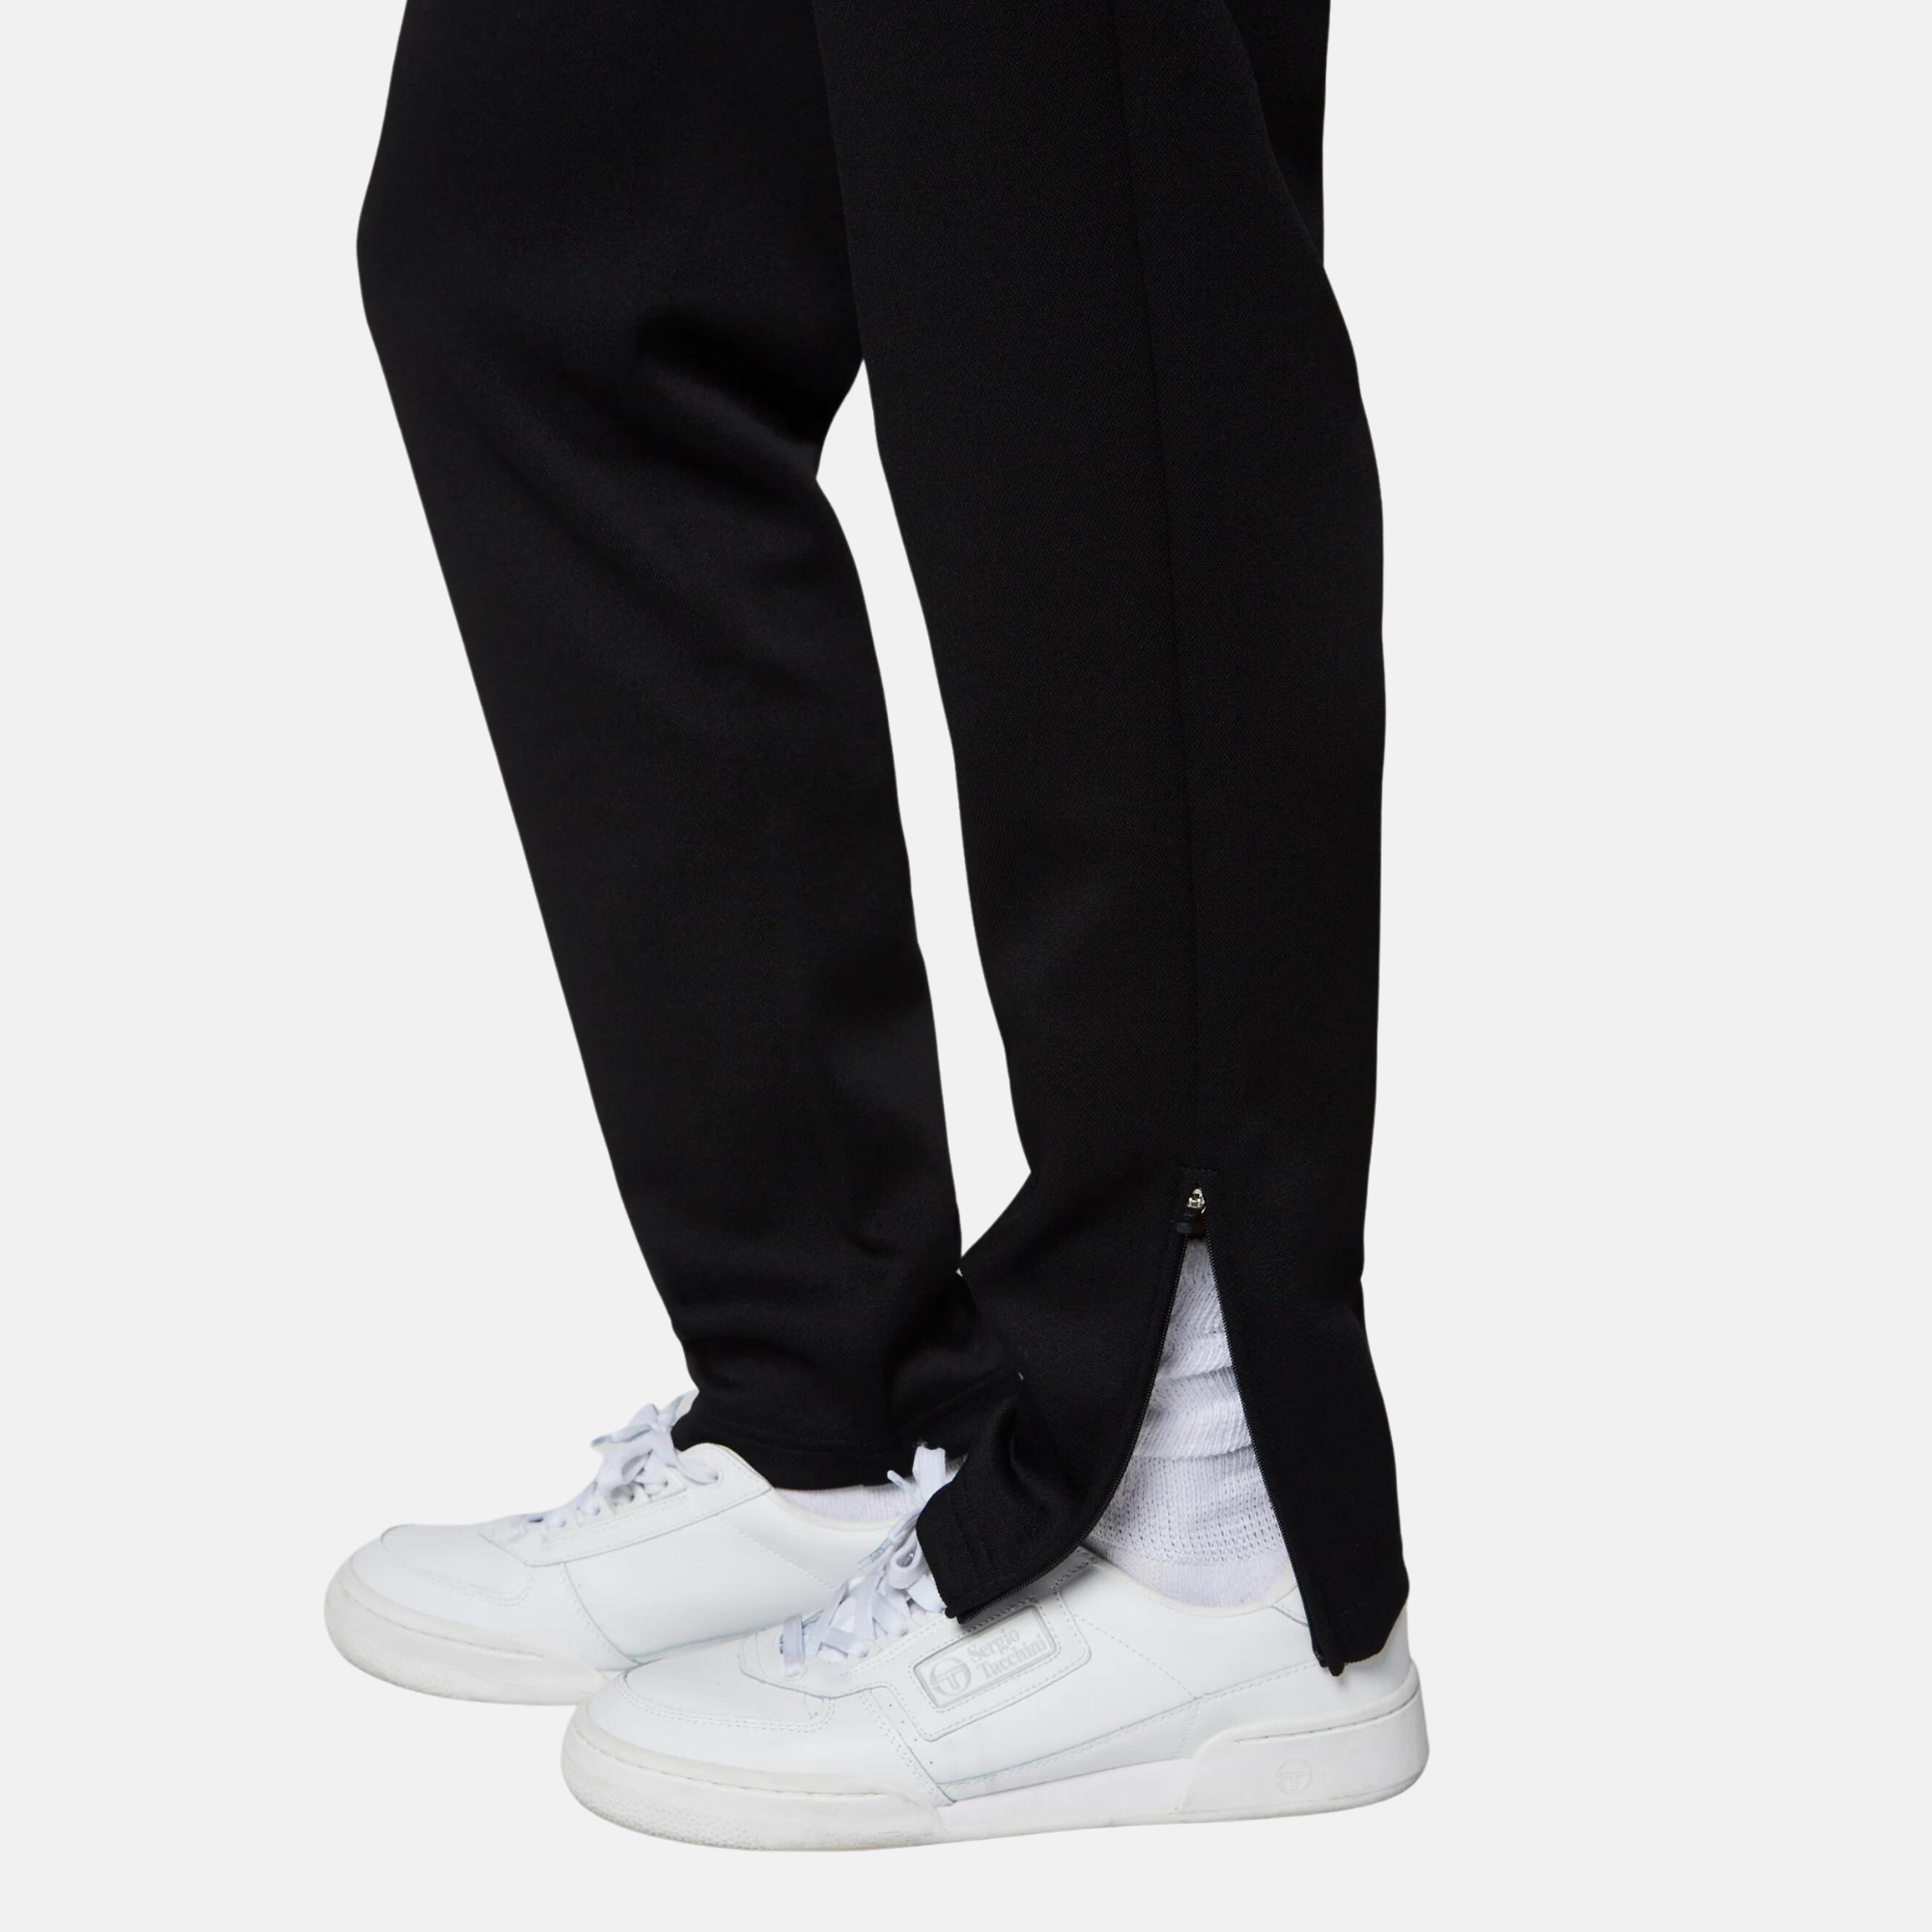 Buy Reebok Men's Fitted Track Pants (GD8570_Black_L) Online at Lowest Price  Ever in India | Check Reviews & Ratings - Shop The World